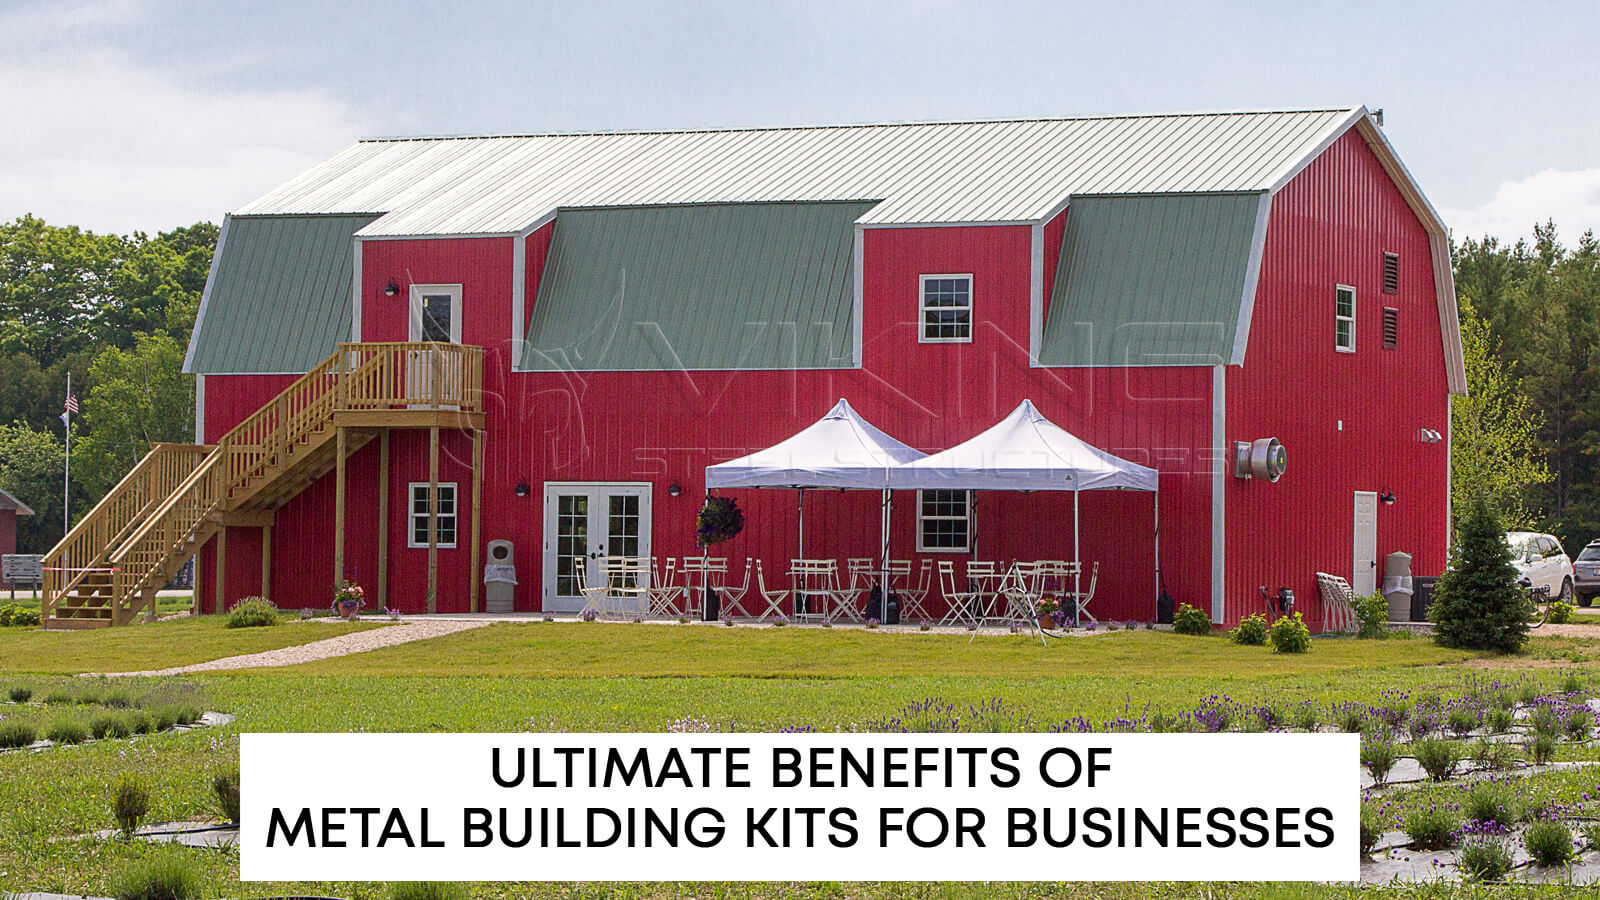 Ultimate Benefits of Metal Building Kits for Businesses